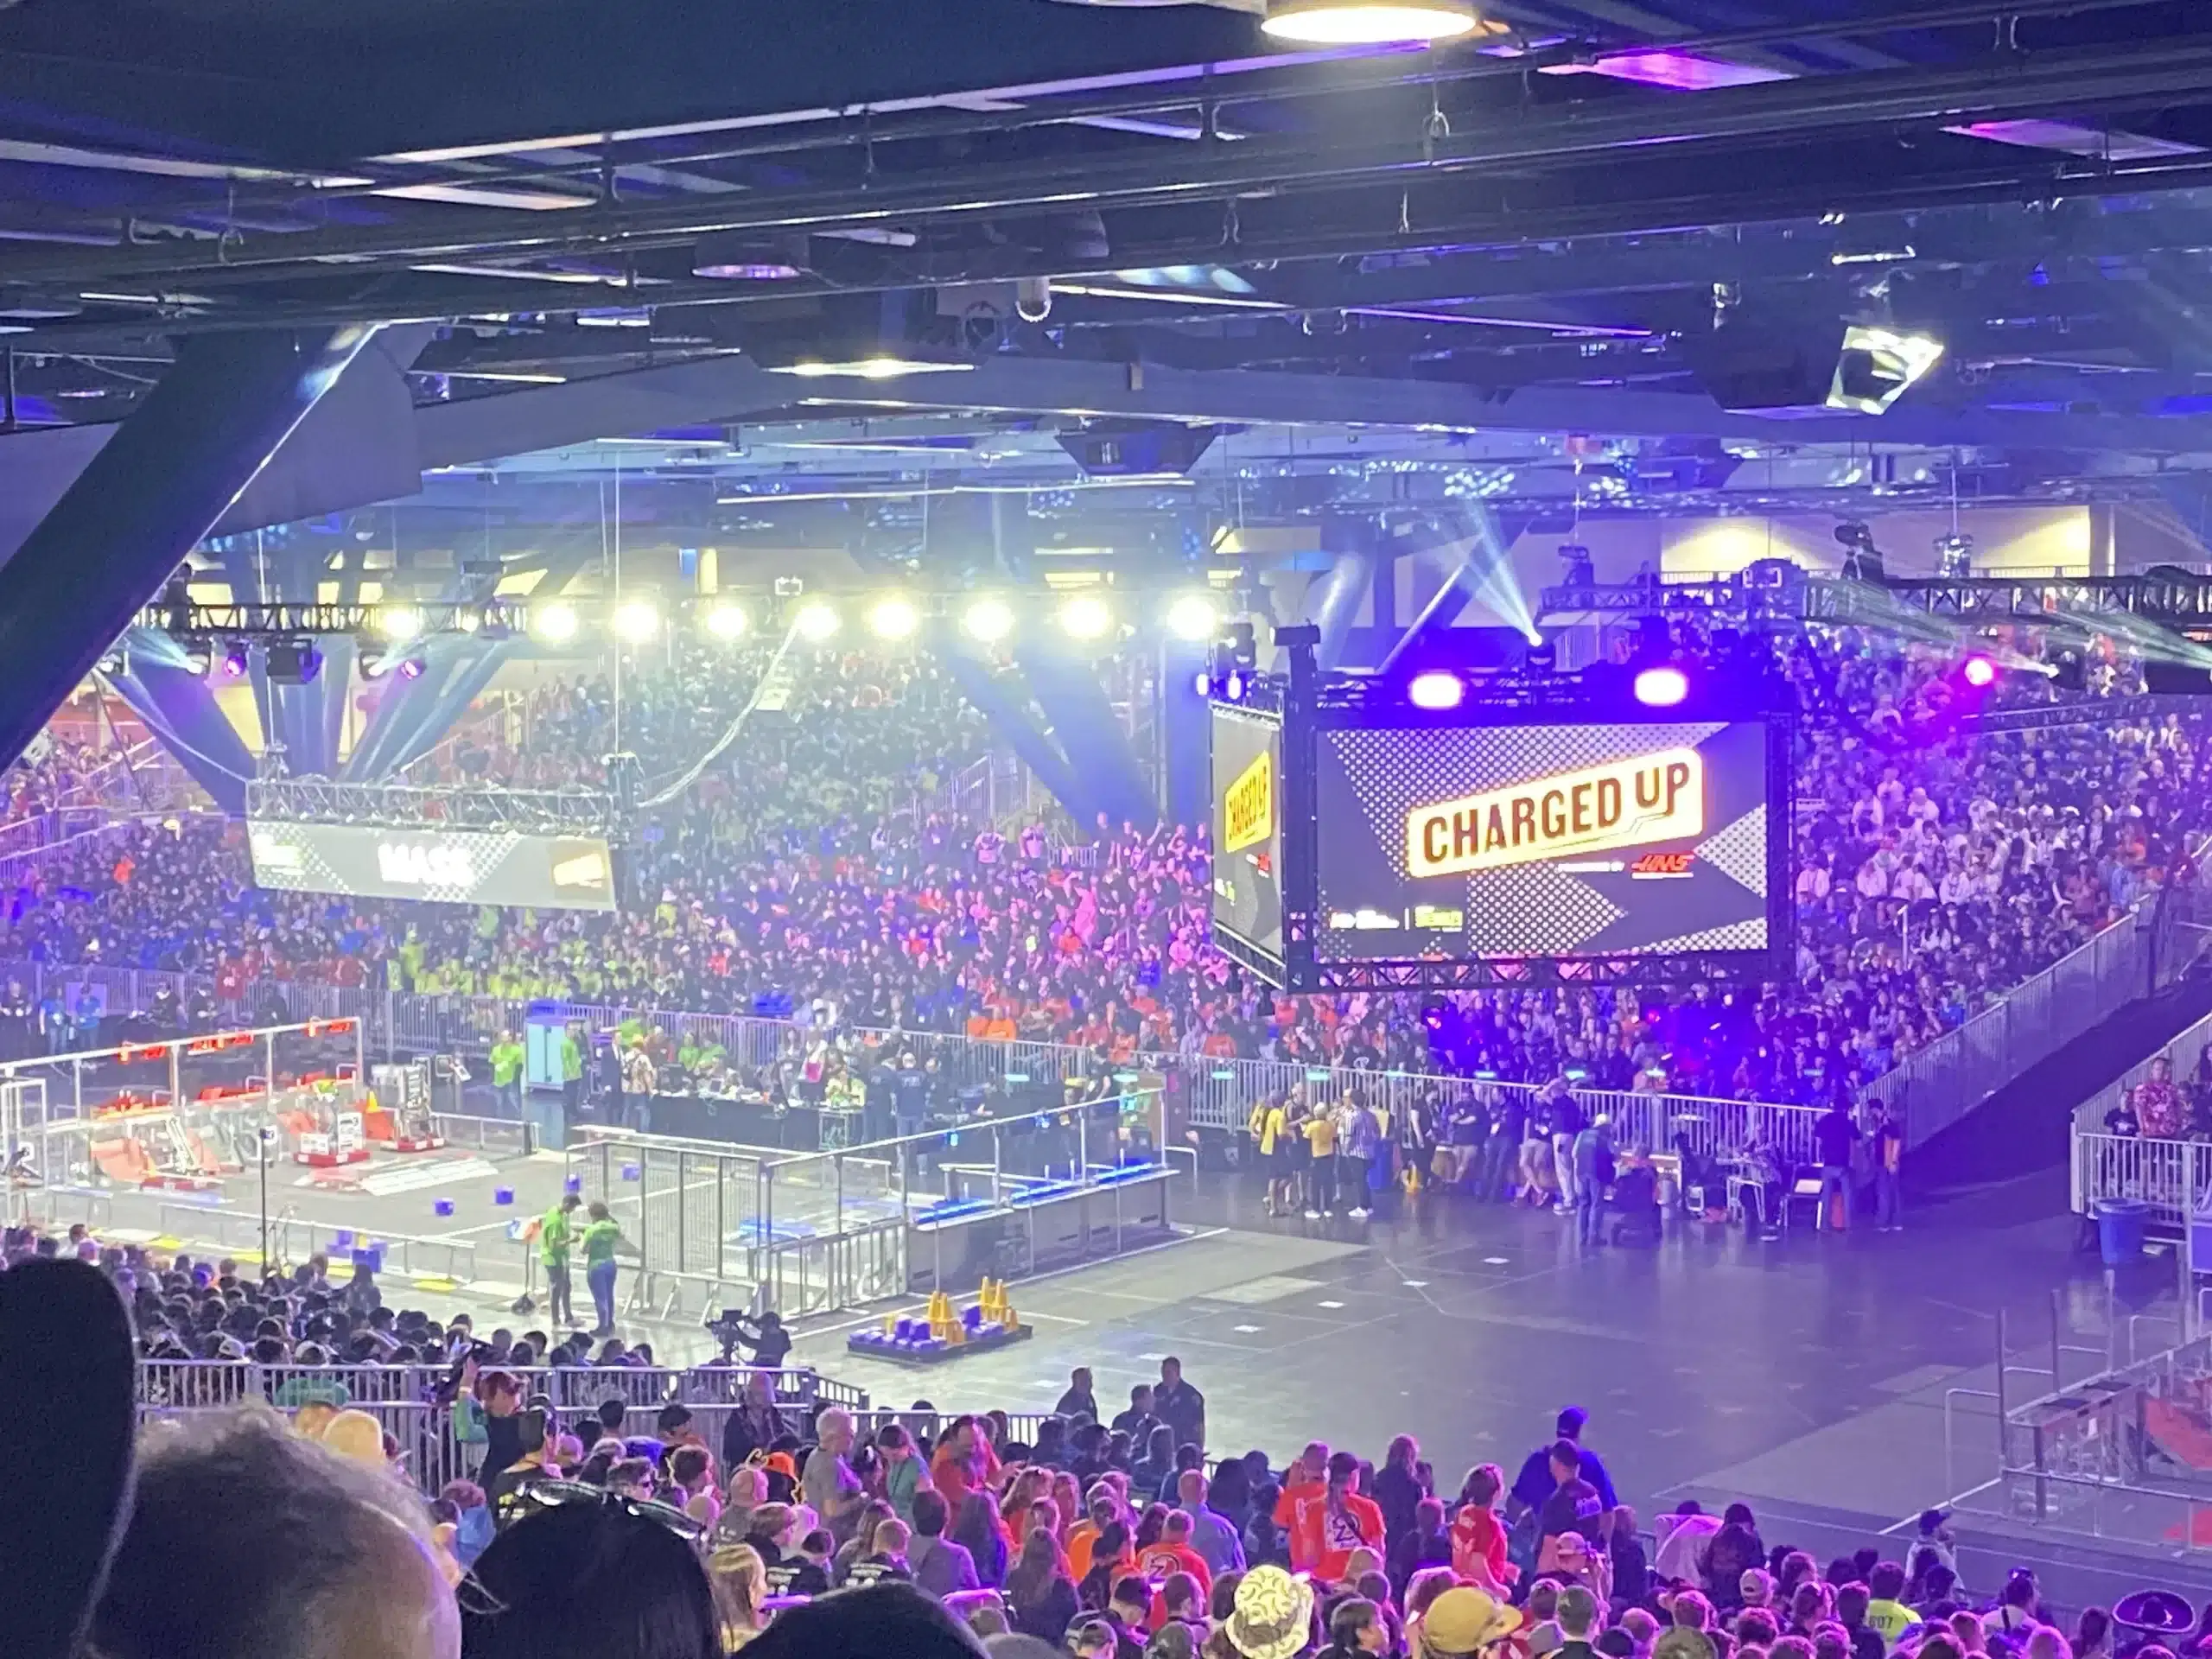 The Wiredcats at First Robotics Championship in Houston, Texas.